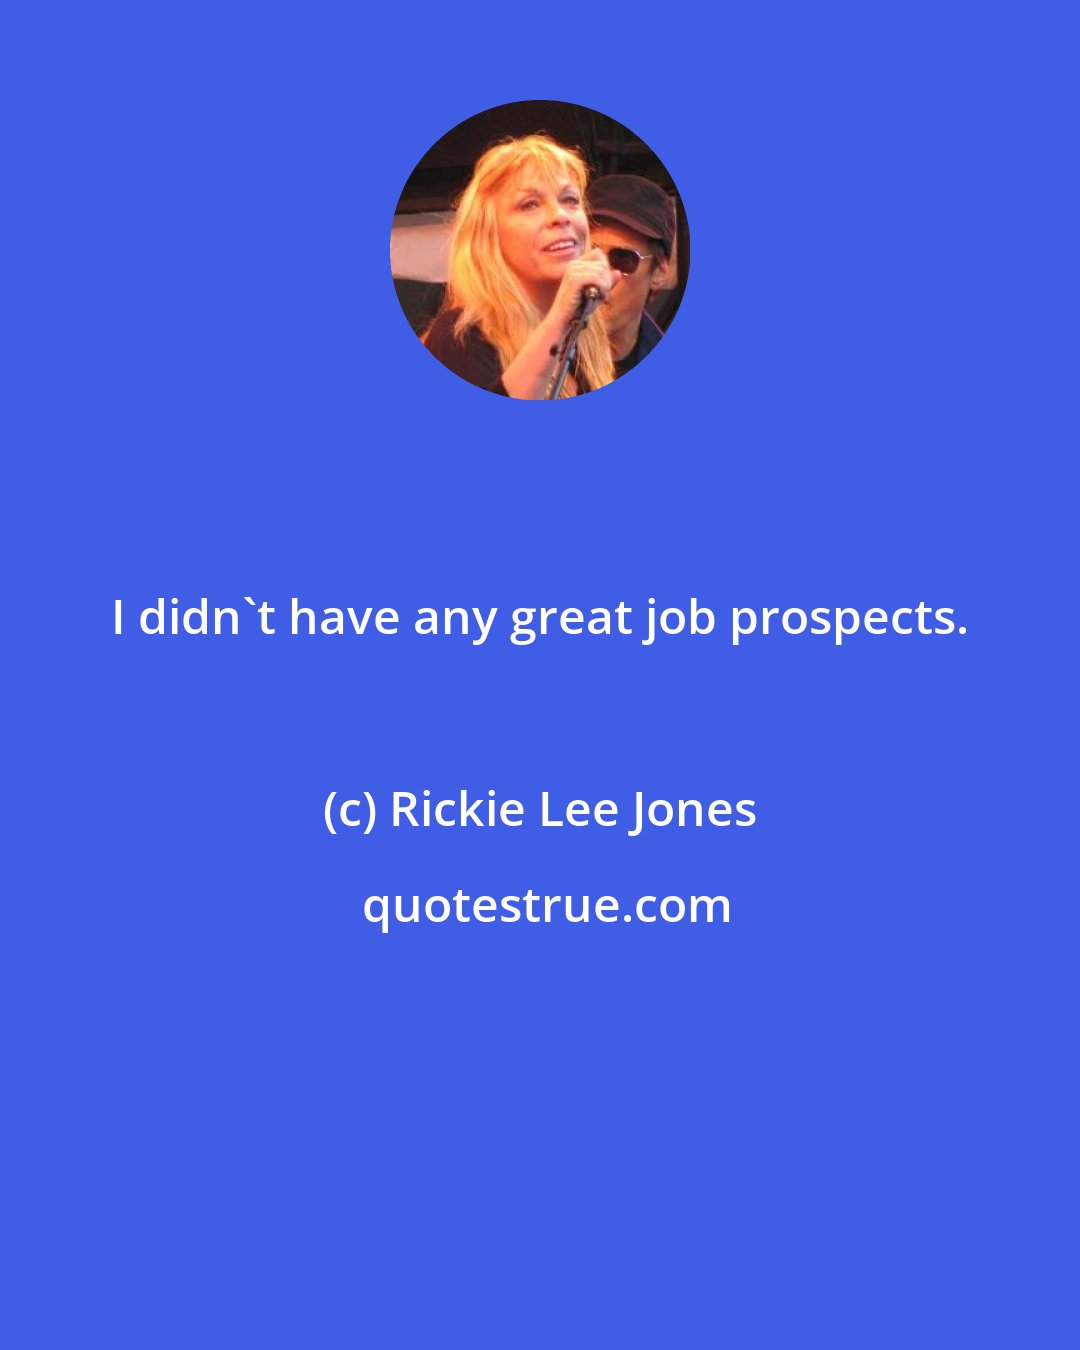 Rickie Lee Jones: I didn't have any great job prospects.